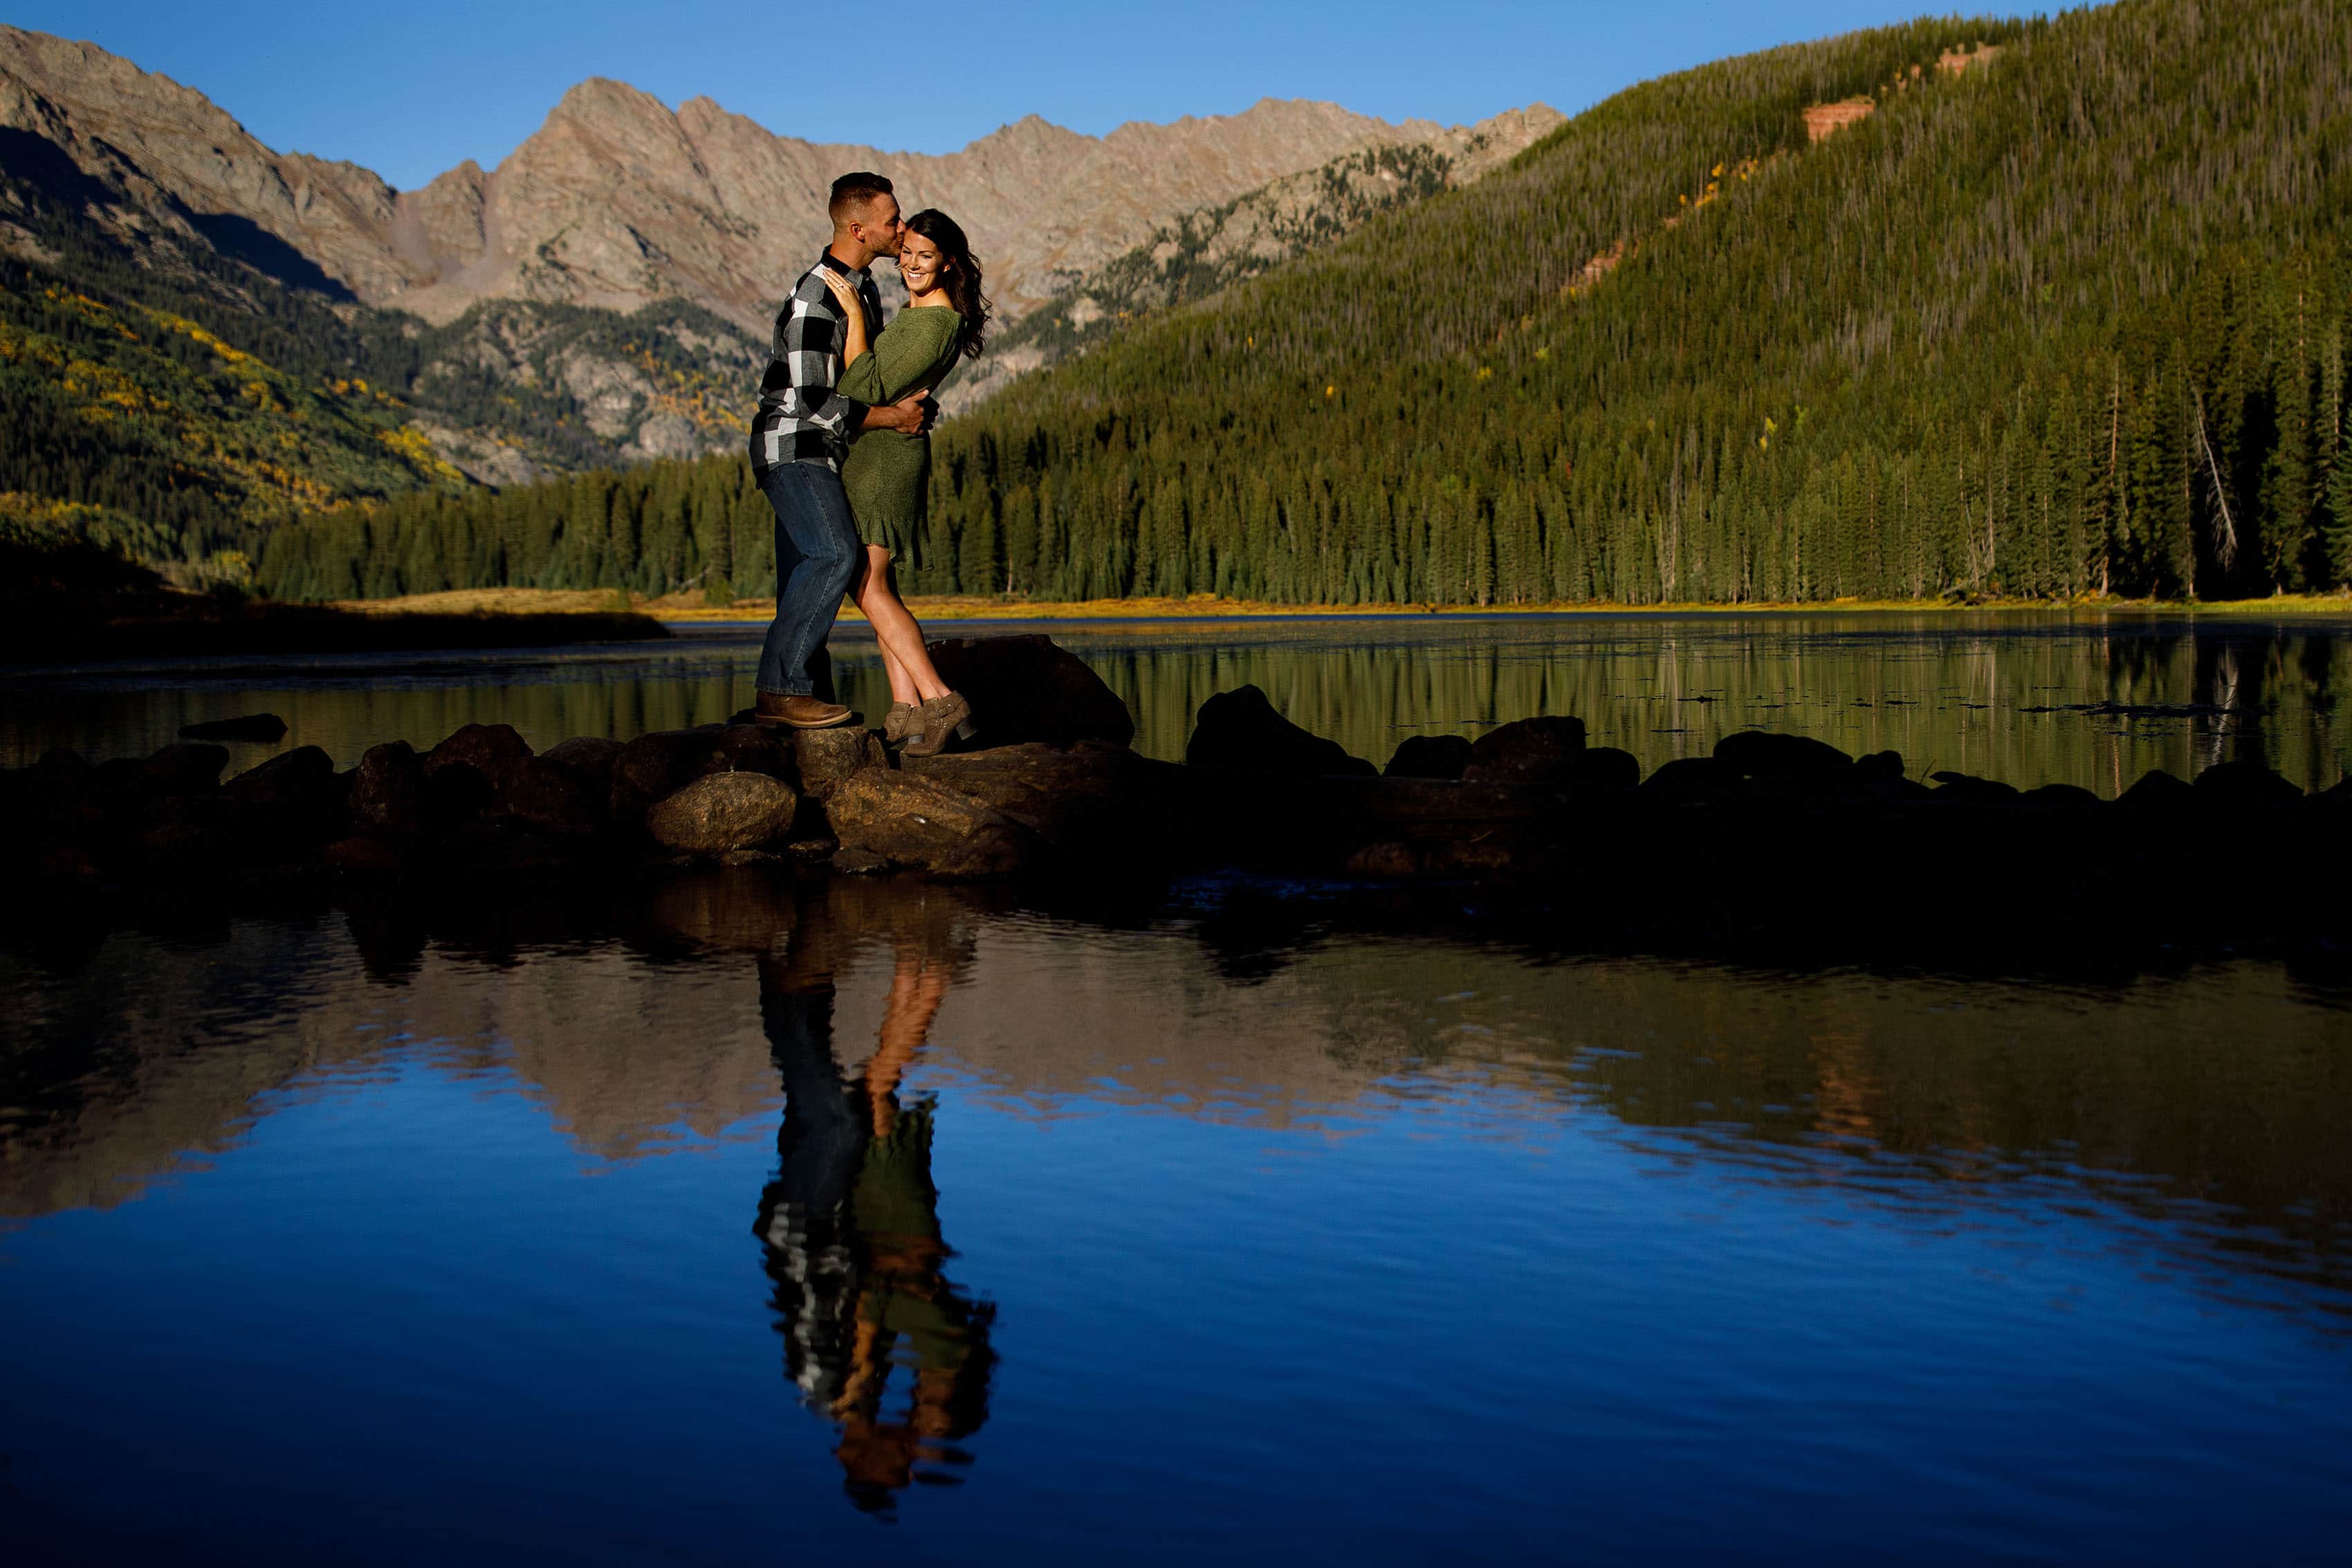 Brendan kisses Caroline near the water edge at Piney River Ranch during their engagement session in Vail